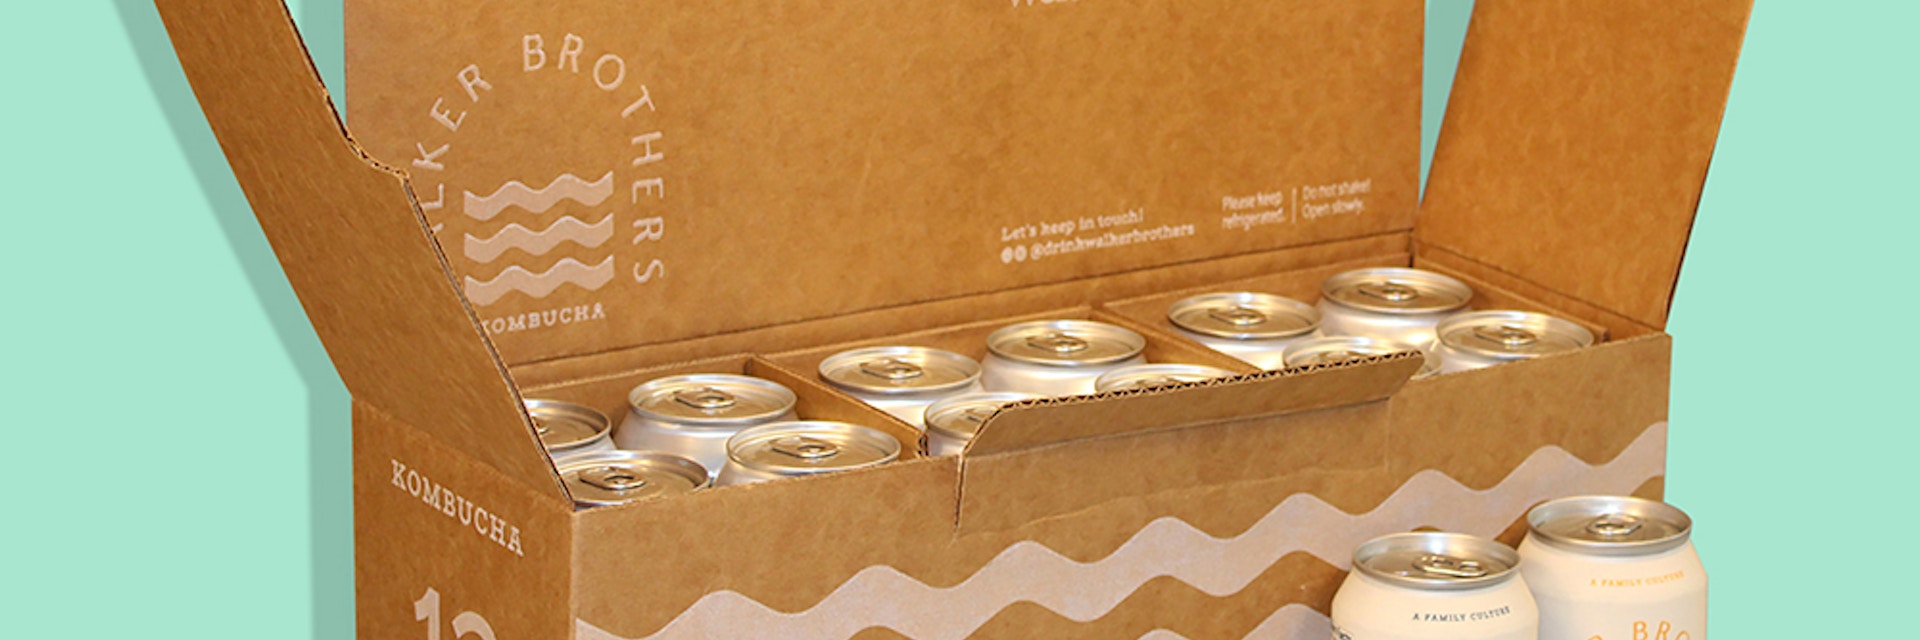 kombucha cold brew shipping boxes for cans